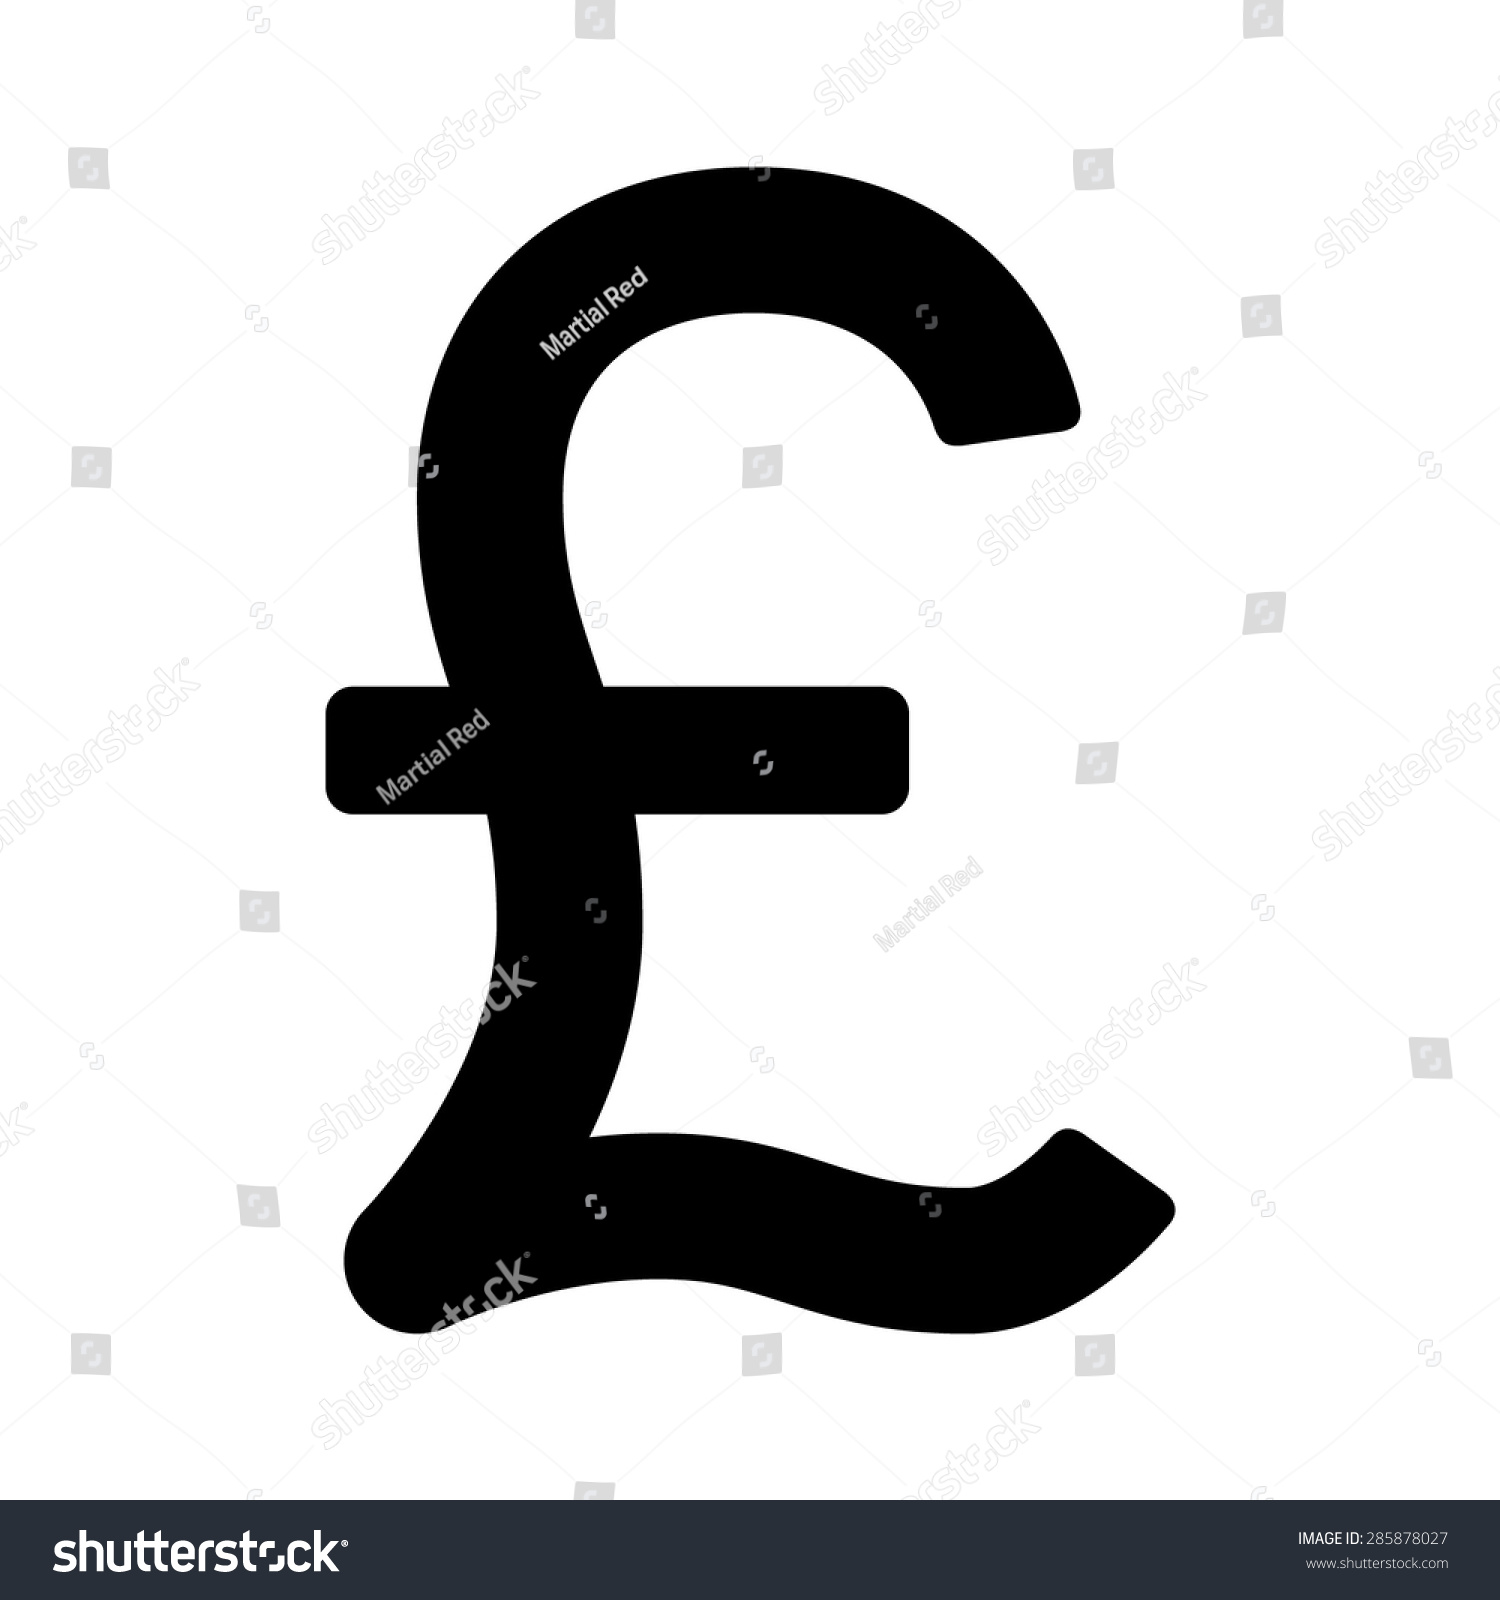 Money bag icon with British Pound Sterling symbol , GBP currency 